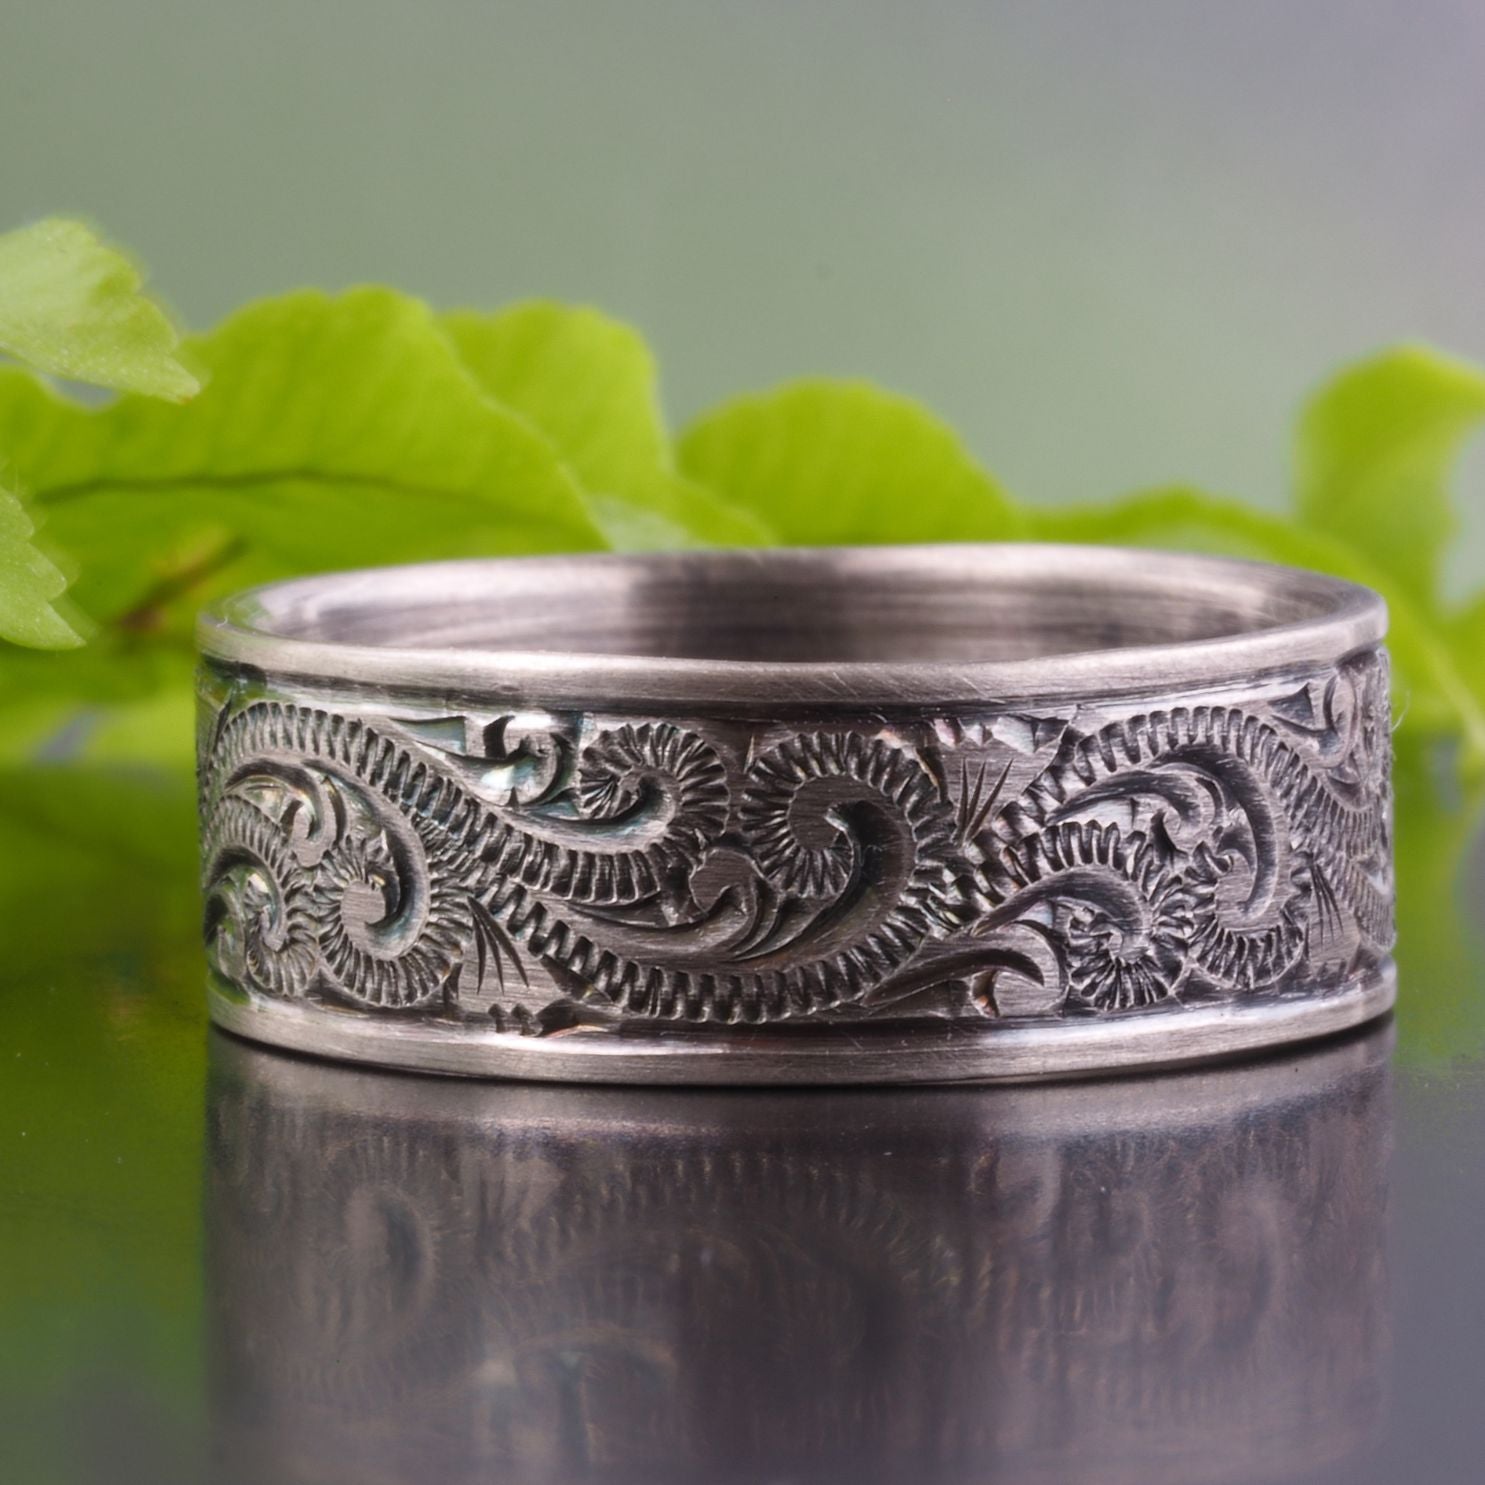 Old English Engraved Silver Signet Ring By Scarlett Off The Map Jewellery |  notonthehighstreet.com